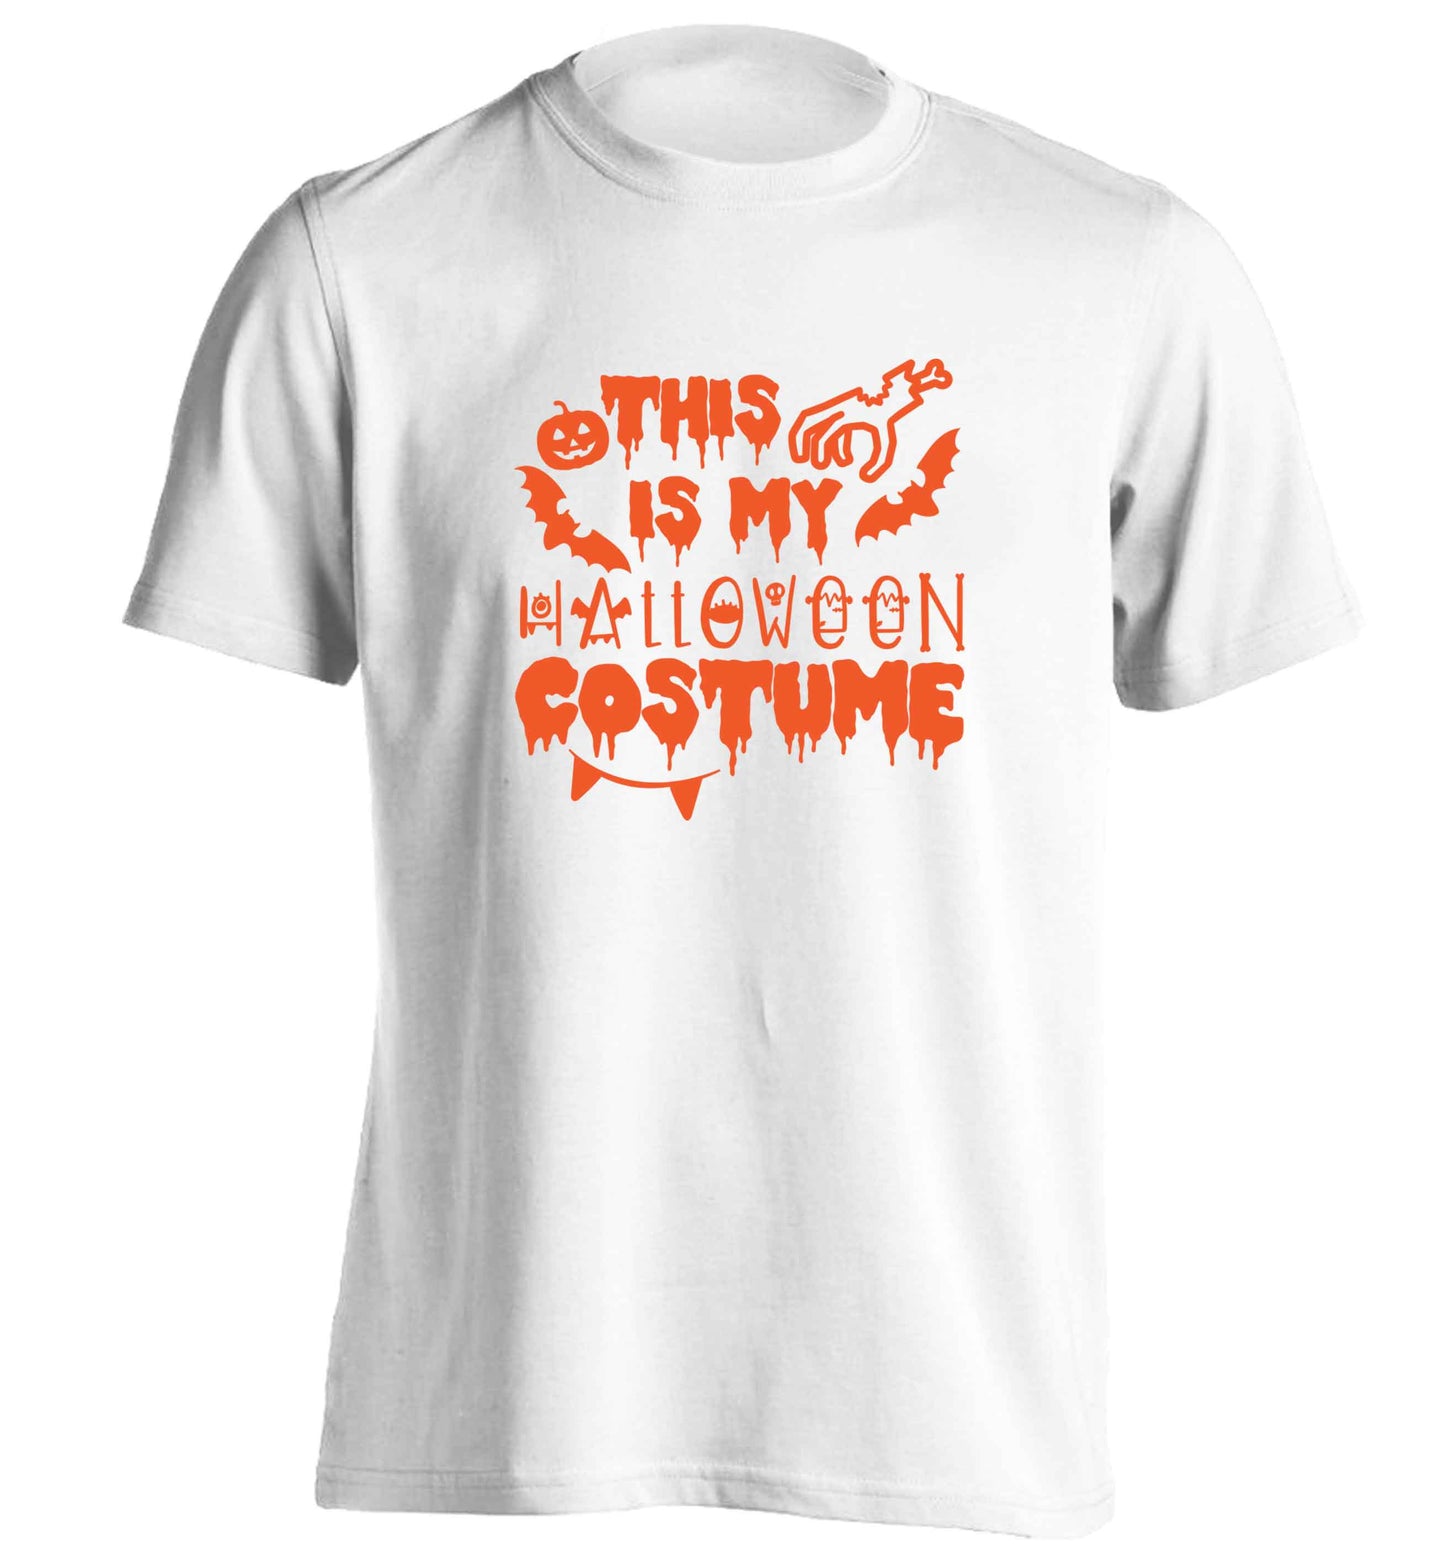 This is my halloween costume adults unisex white Tshirt 2XL